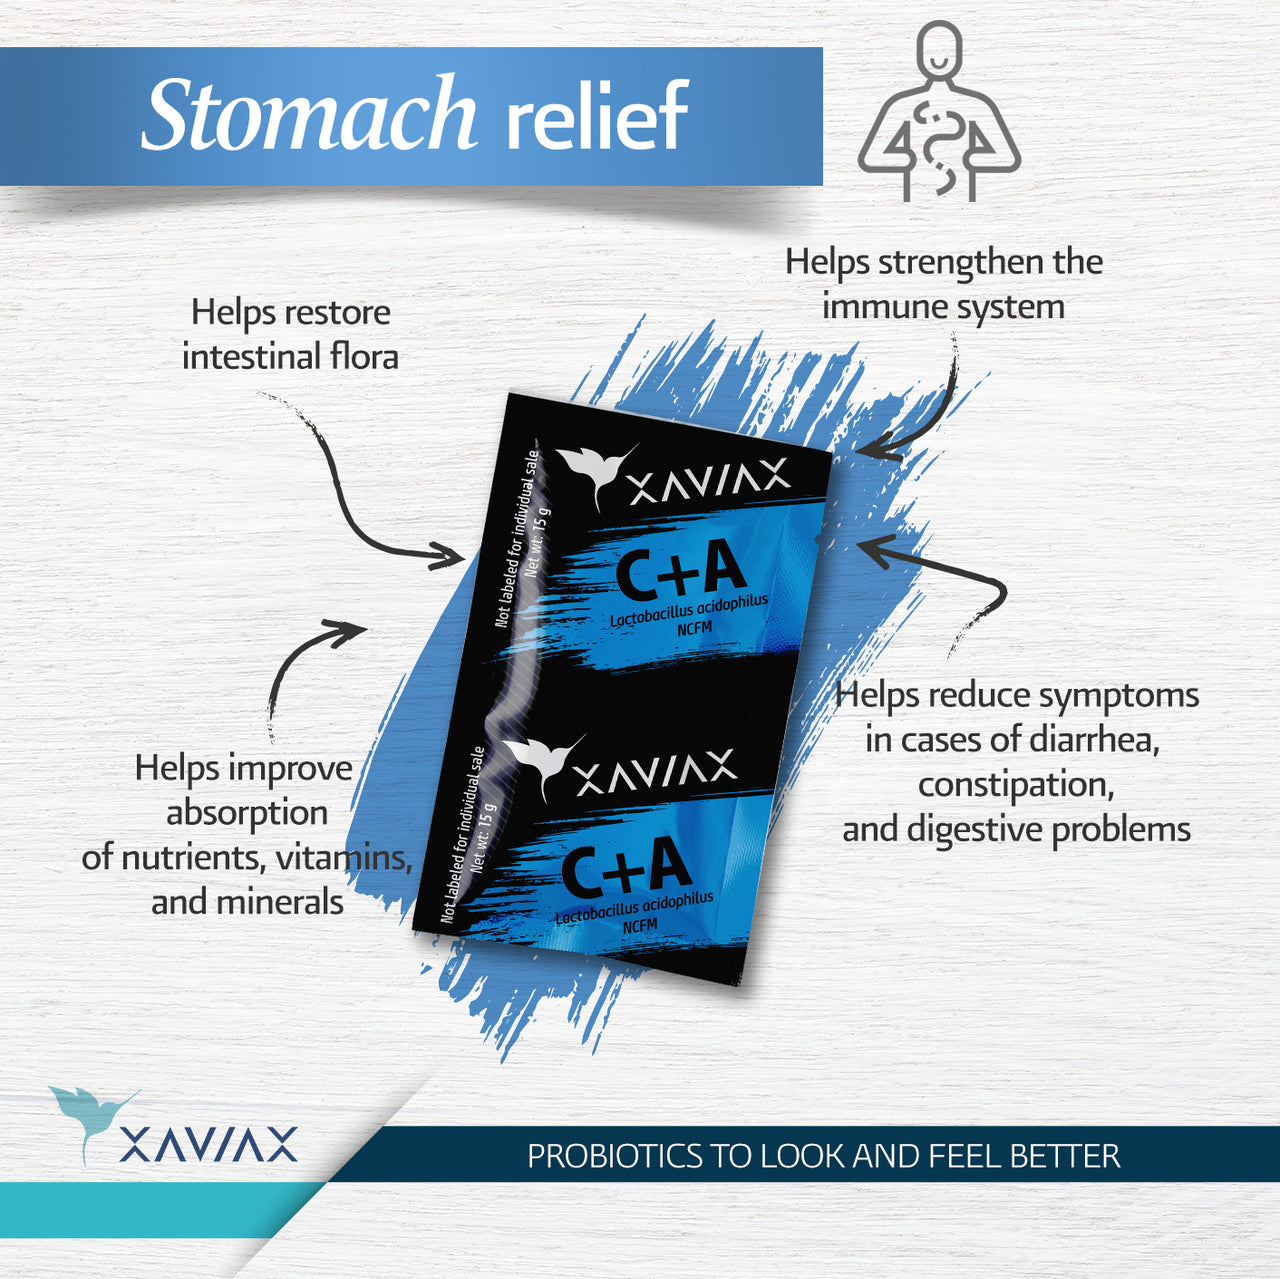 STOMACH RELIEF WITH XAVIAX C+A PROBIOTICS